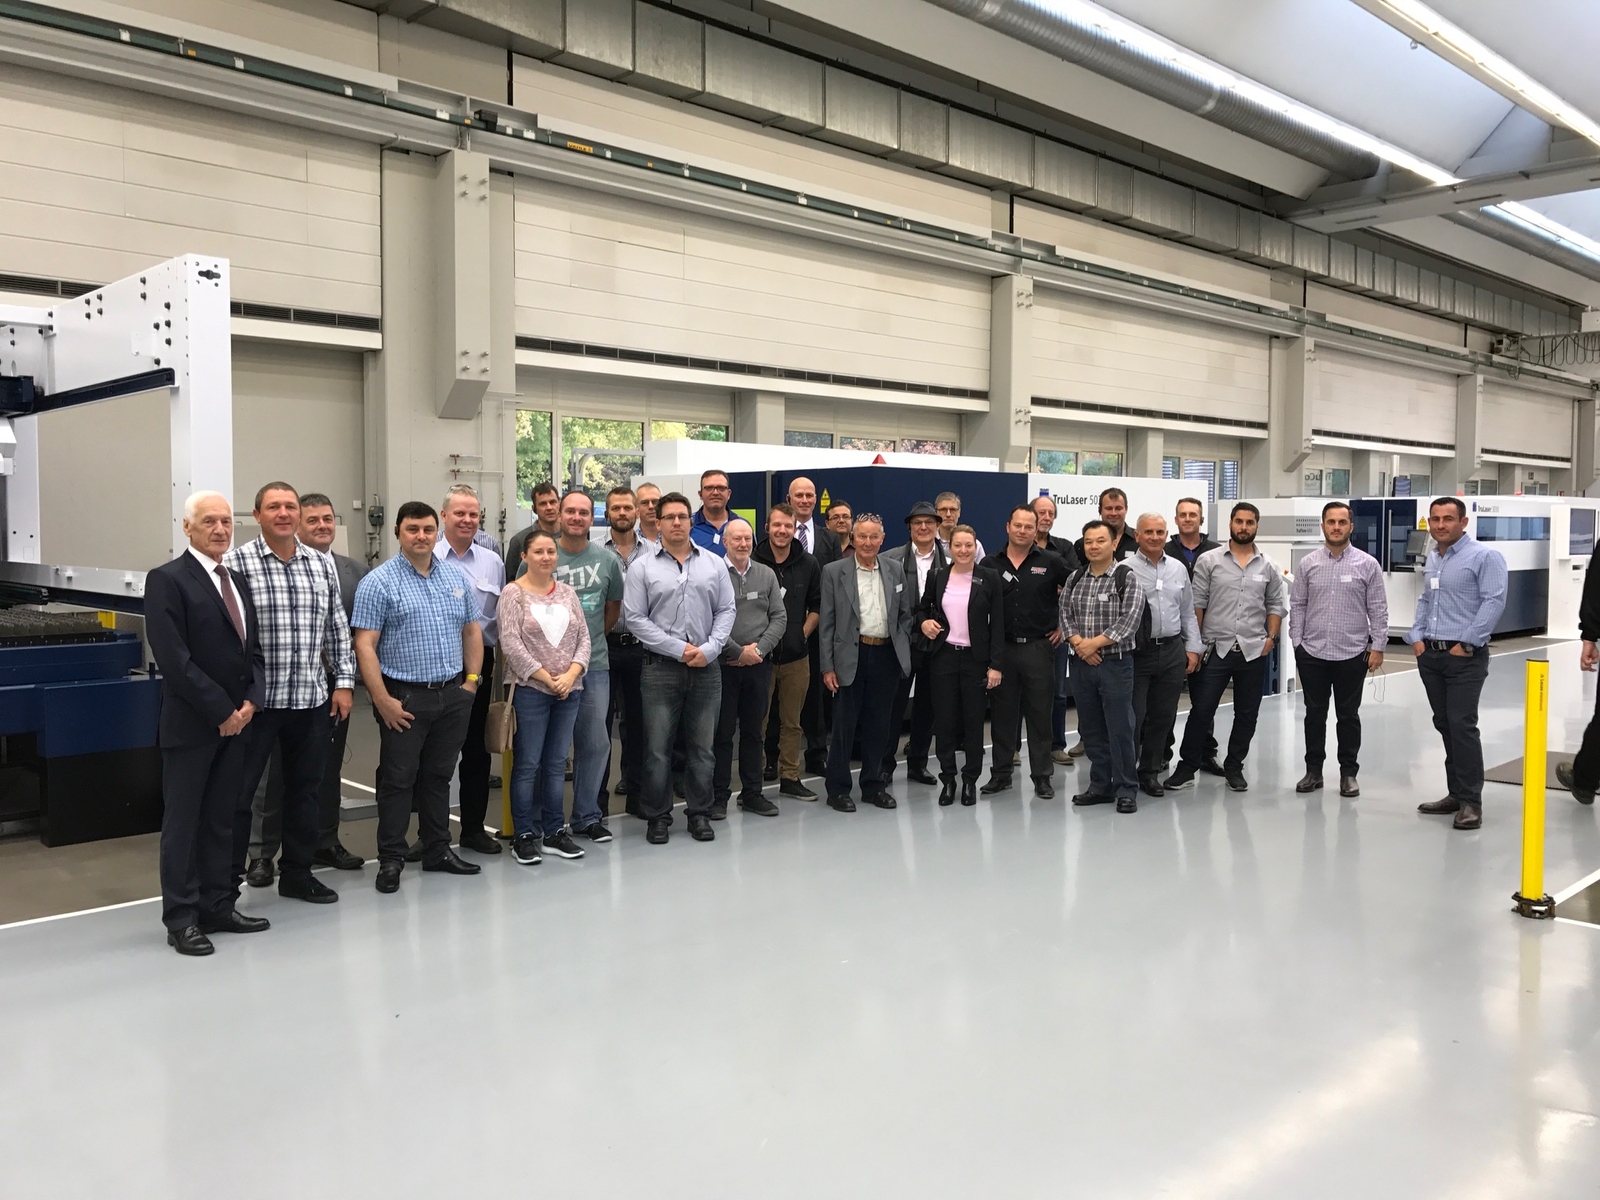 EuroBLECH – The World’s No. 1 for Innovations in Sheet Metal Working